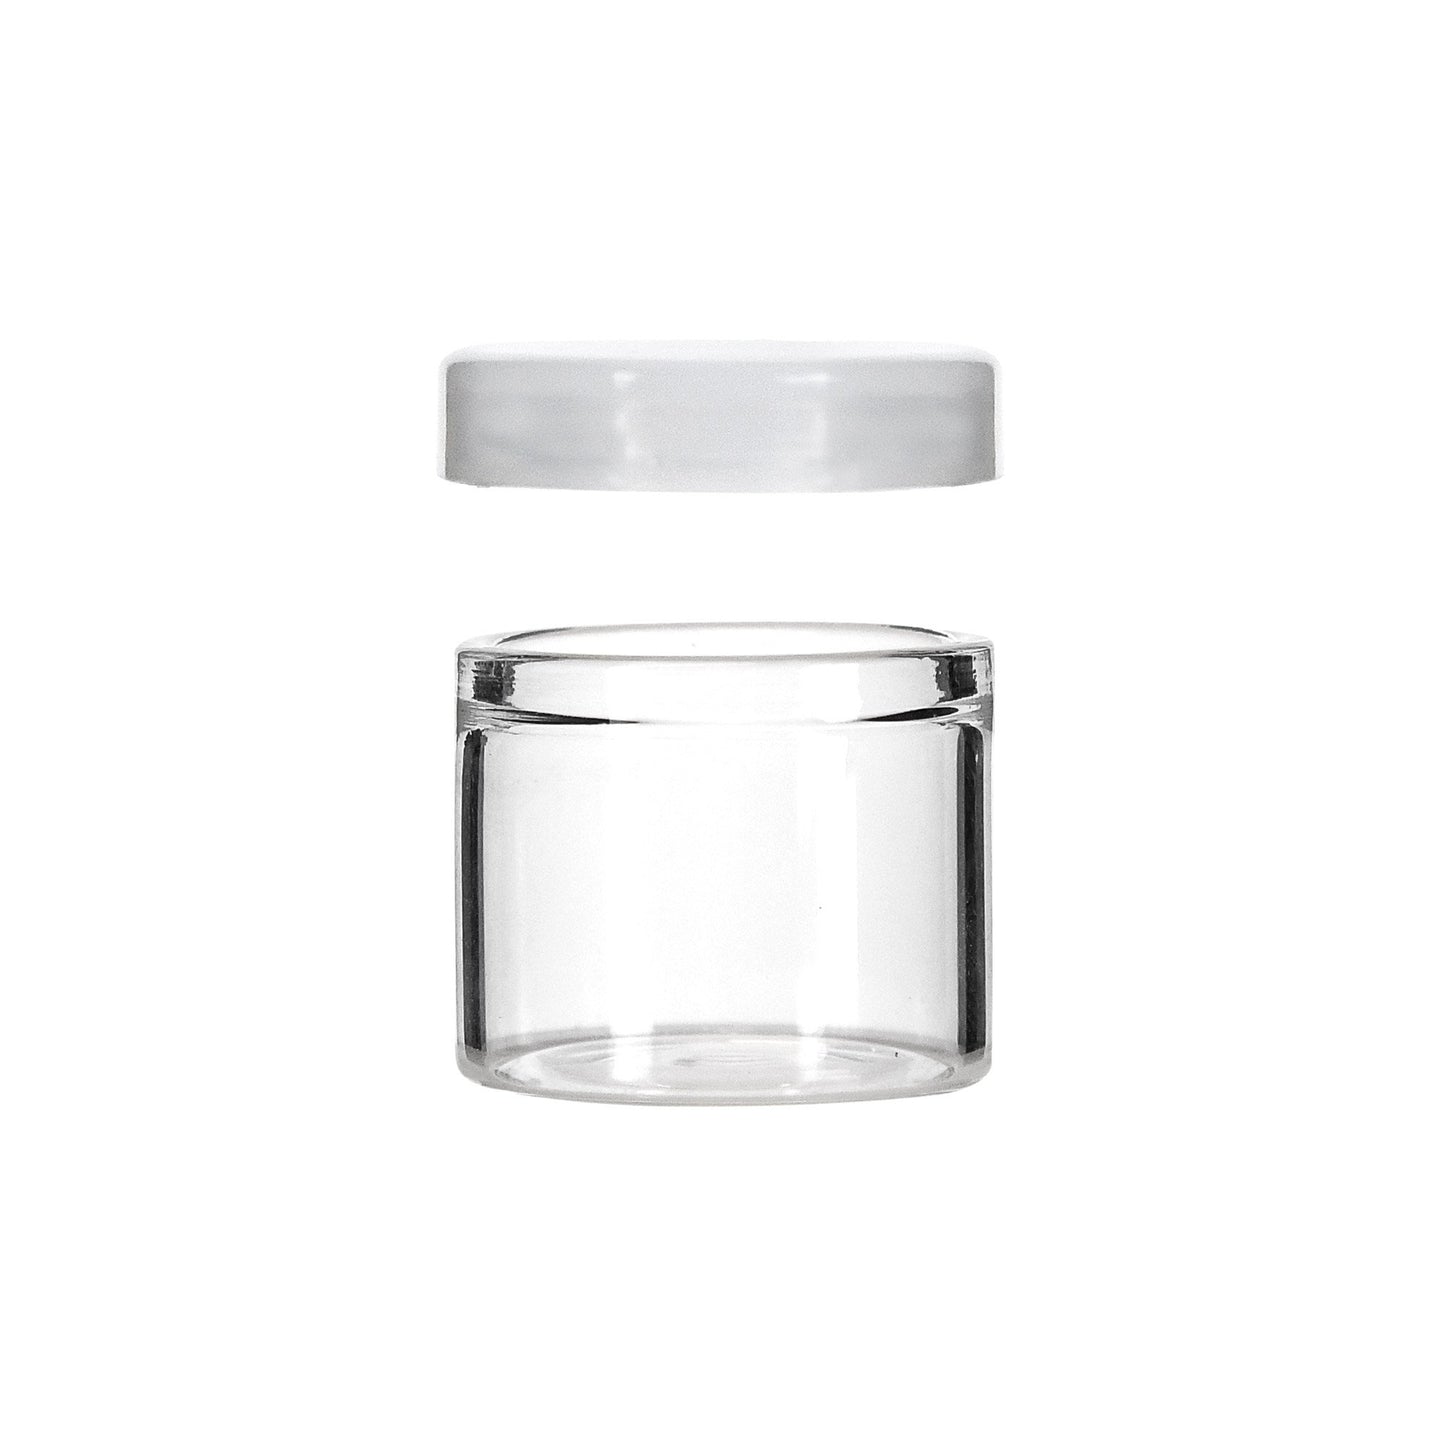 6ml Glass Wide Neck Concentrate Container with Silicone Cap 1 Gram - 144 COUNT